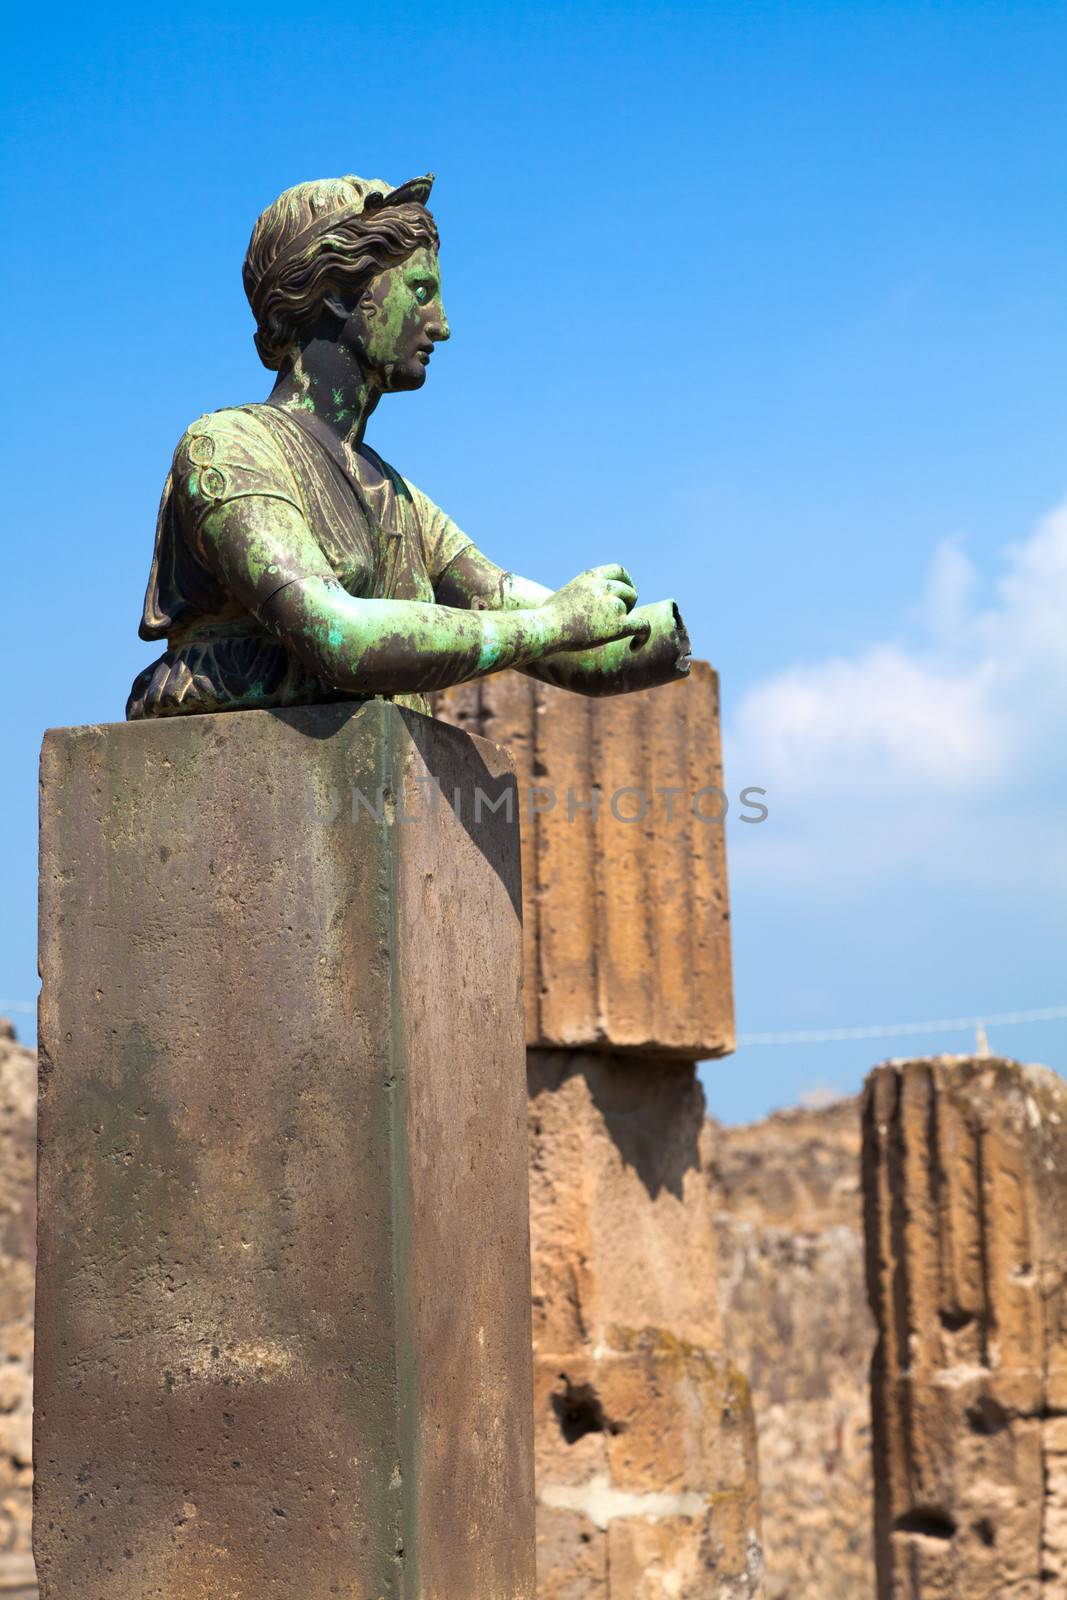 Statue of Diana with columns in Pompeii